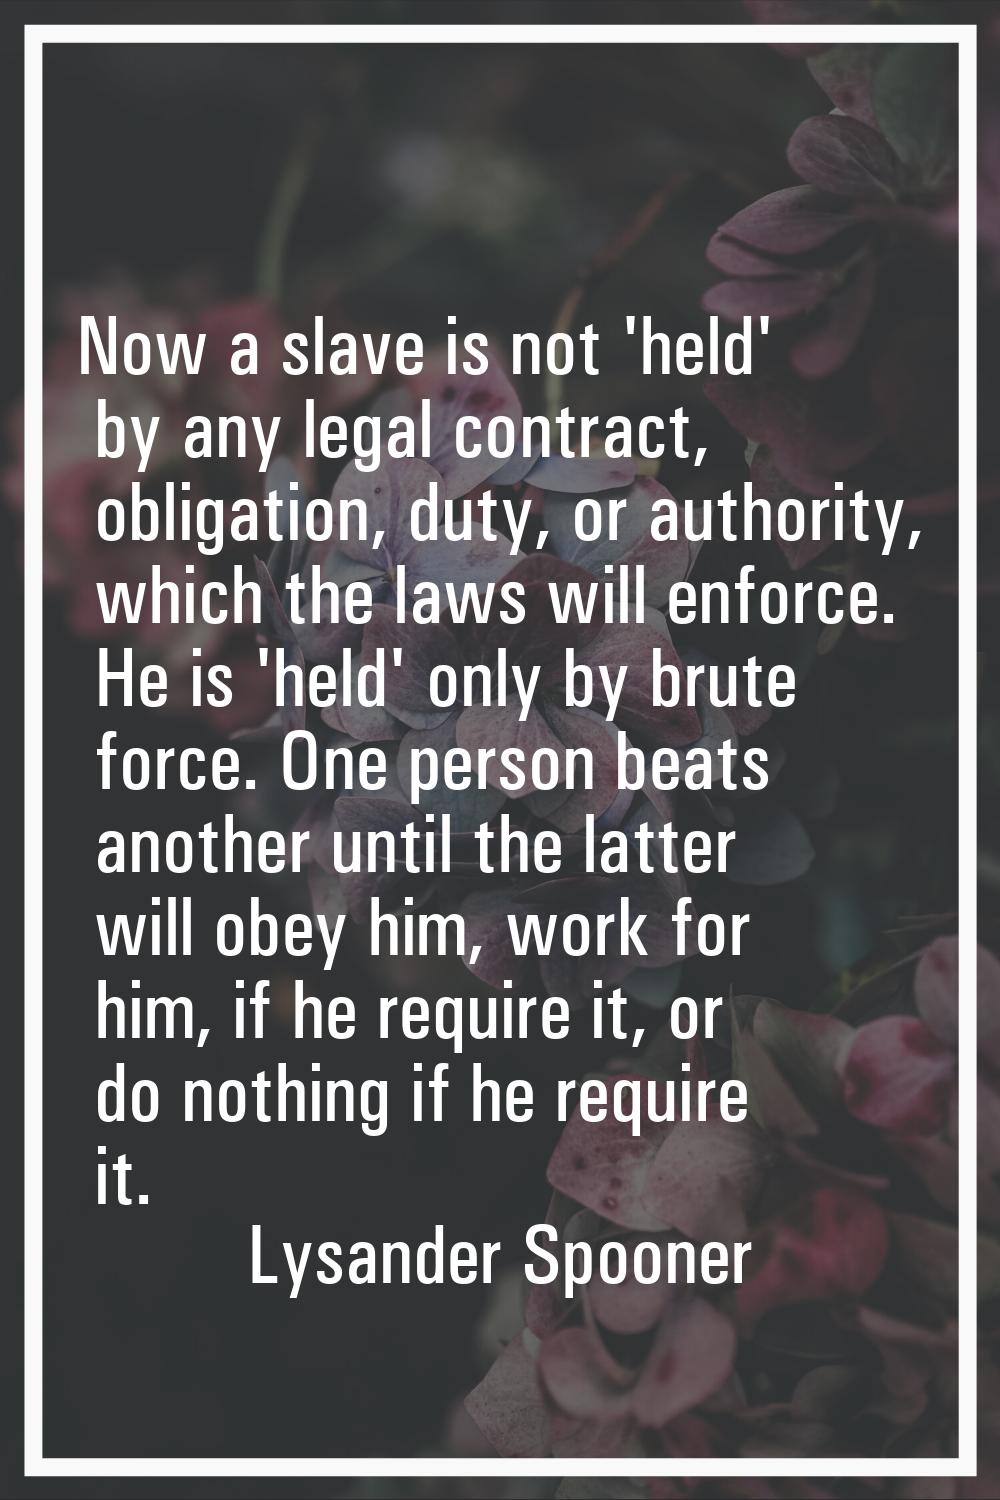 Now a slave is not 'held' by any legal contract, obligation, duty, or authority, which the laws wil